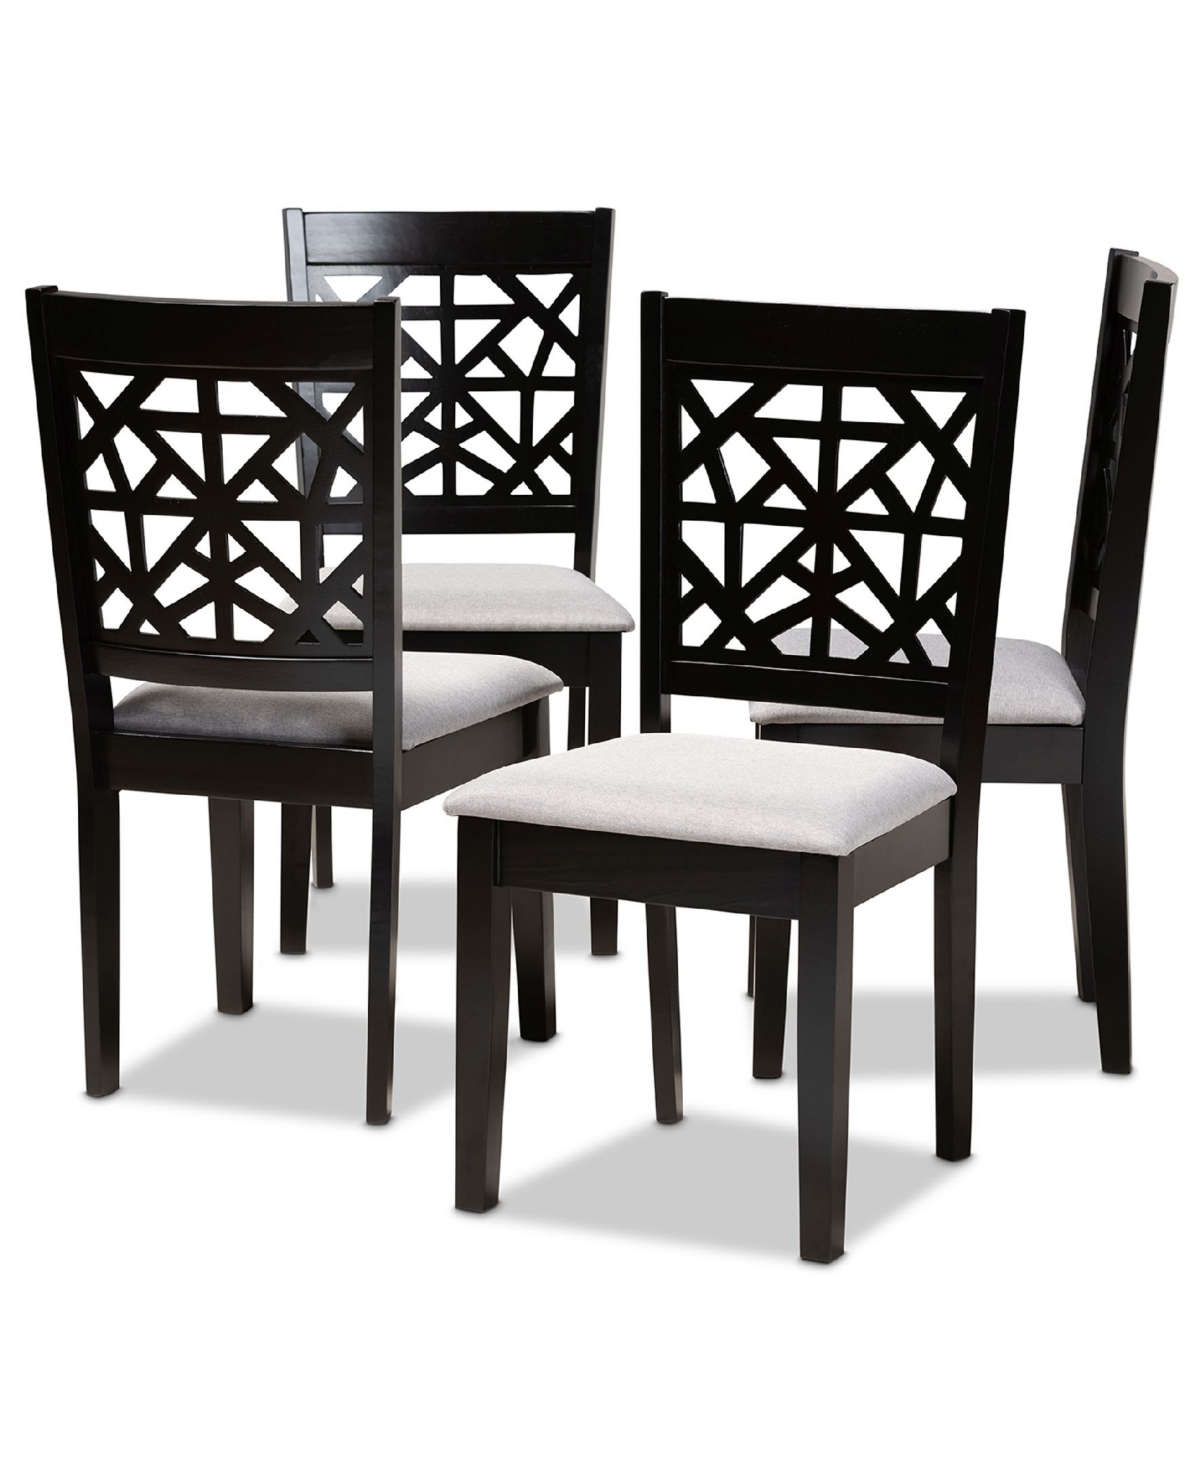 Jackson Modern and Contemporary Fabric Upholstered 4 Piece Dining Chair Set